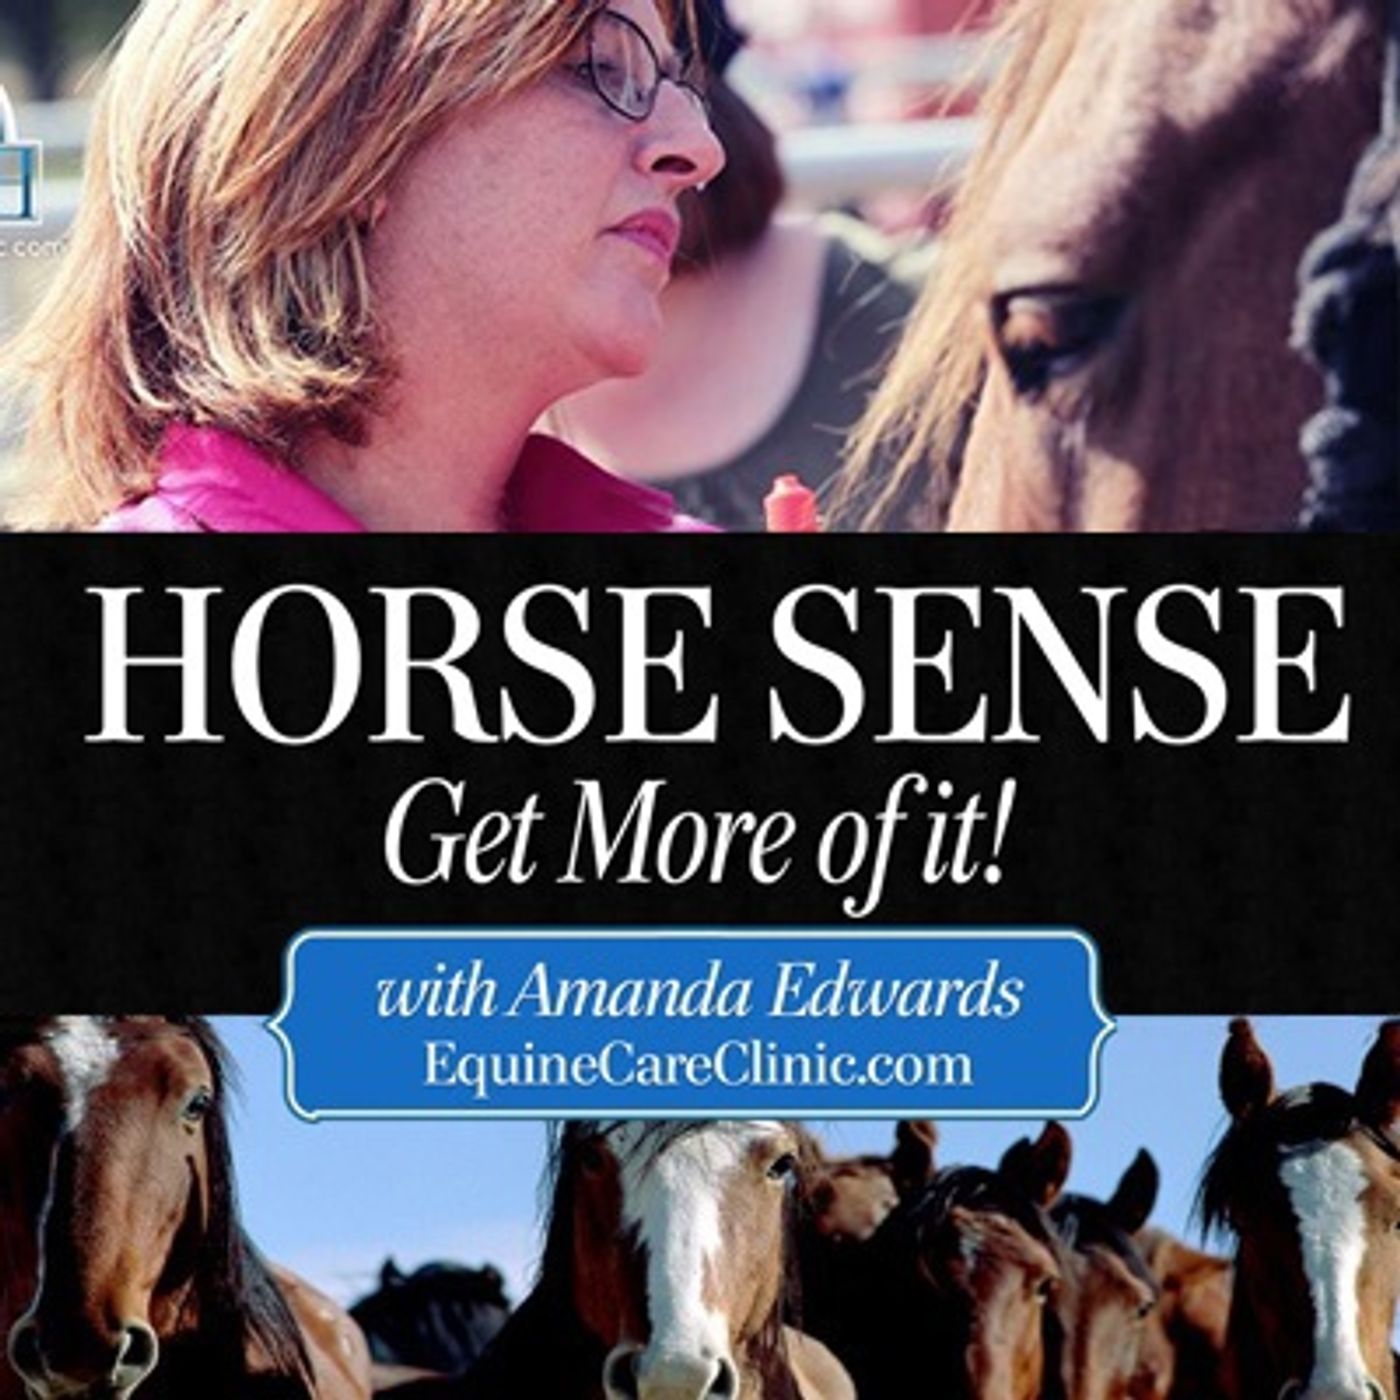 HorseSense Episode 5 - Travel sickness can kill - learn how to avoid common transport problems with Barbara Padalino